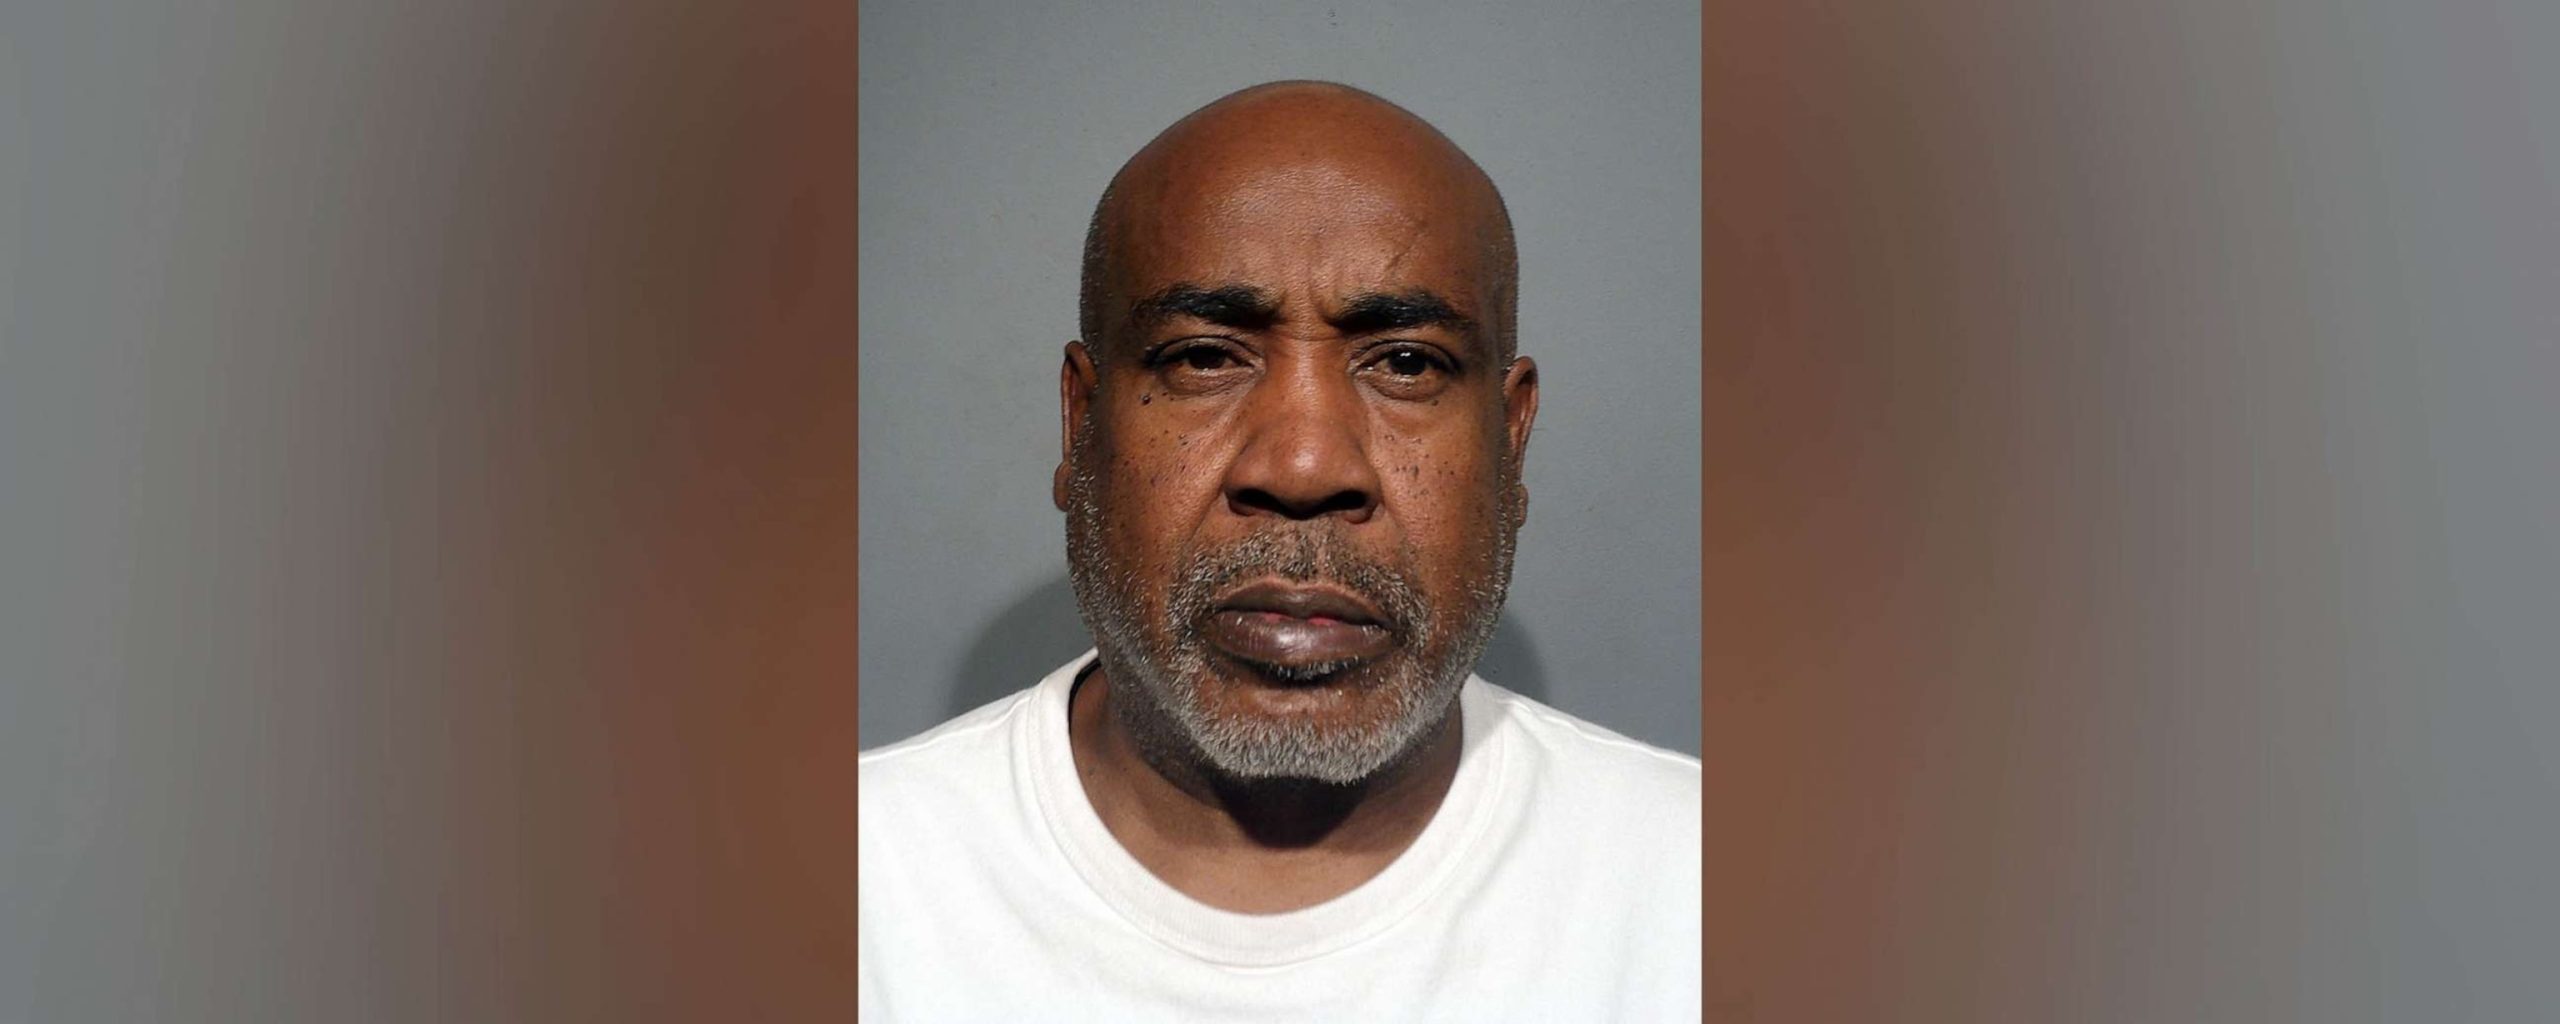 Witness reveals group confrontation involving Duane Davis and Tupac with a 'brandished' gun prior to shooting